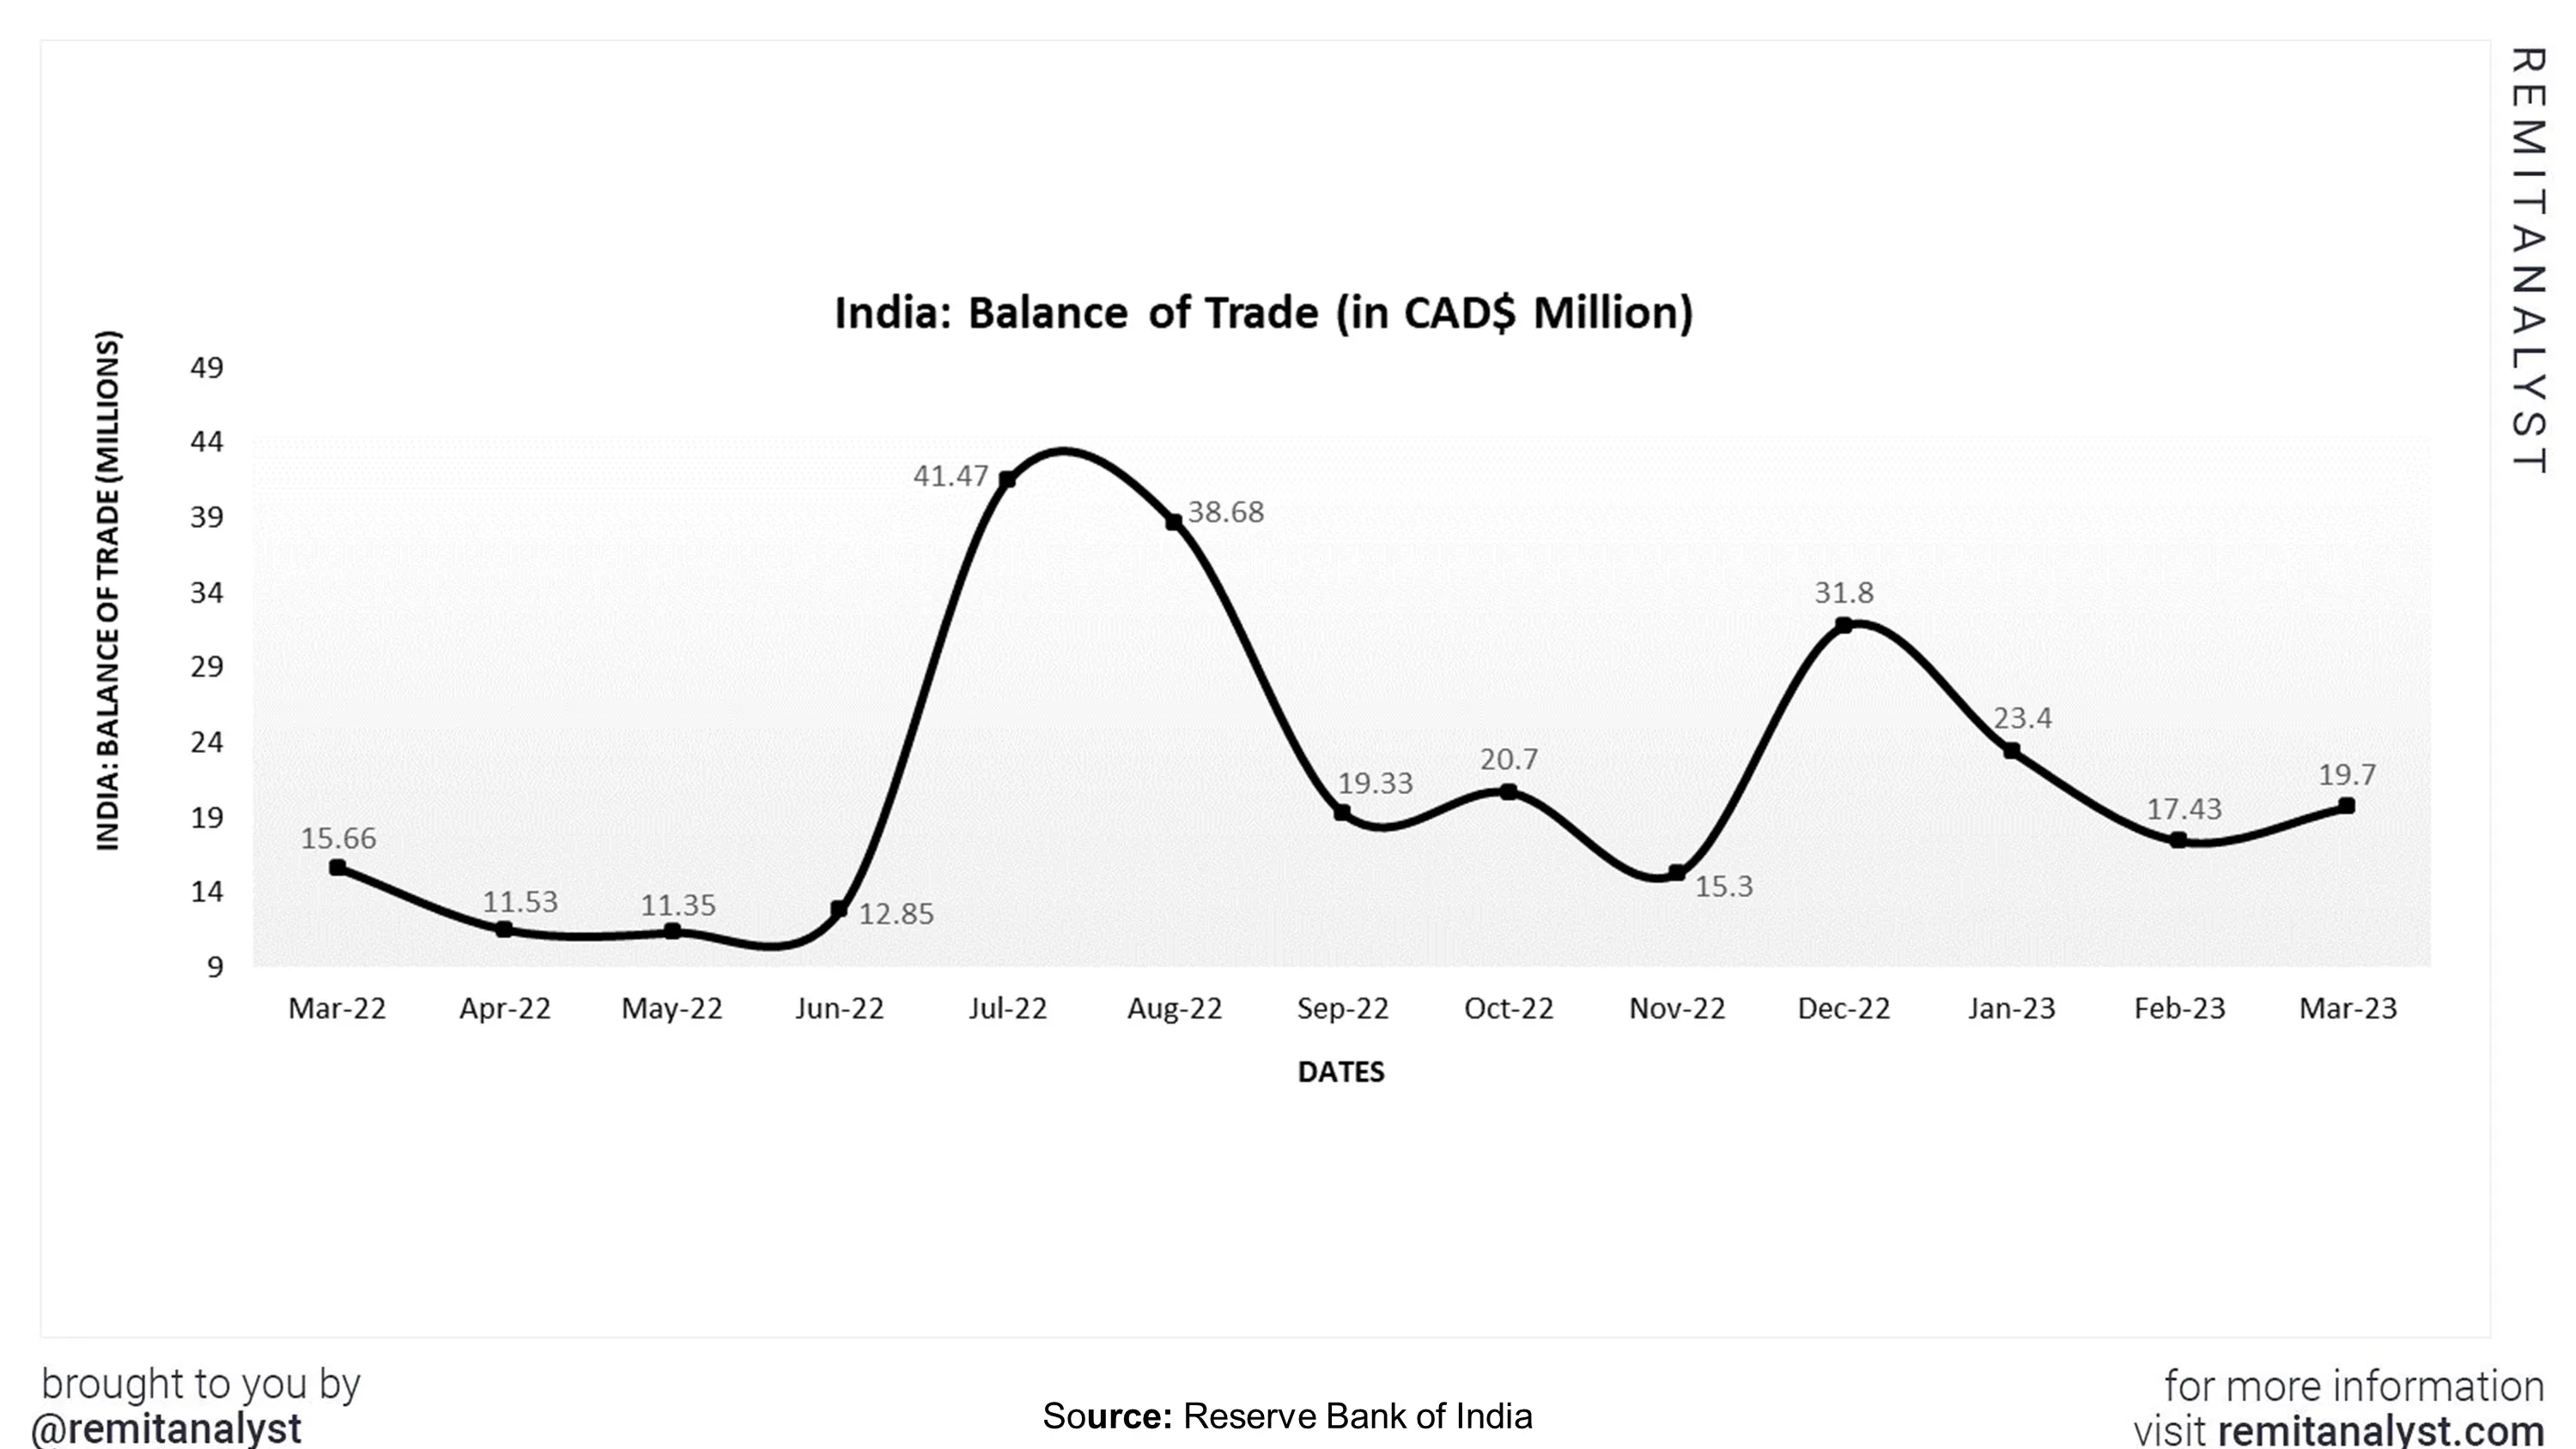 balance-of-trade-india-from-mar-2022-to-mar-2023